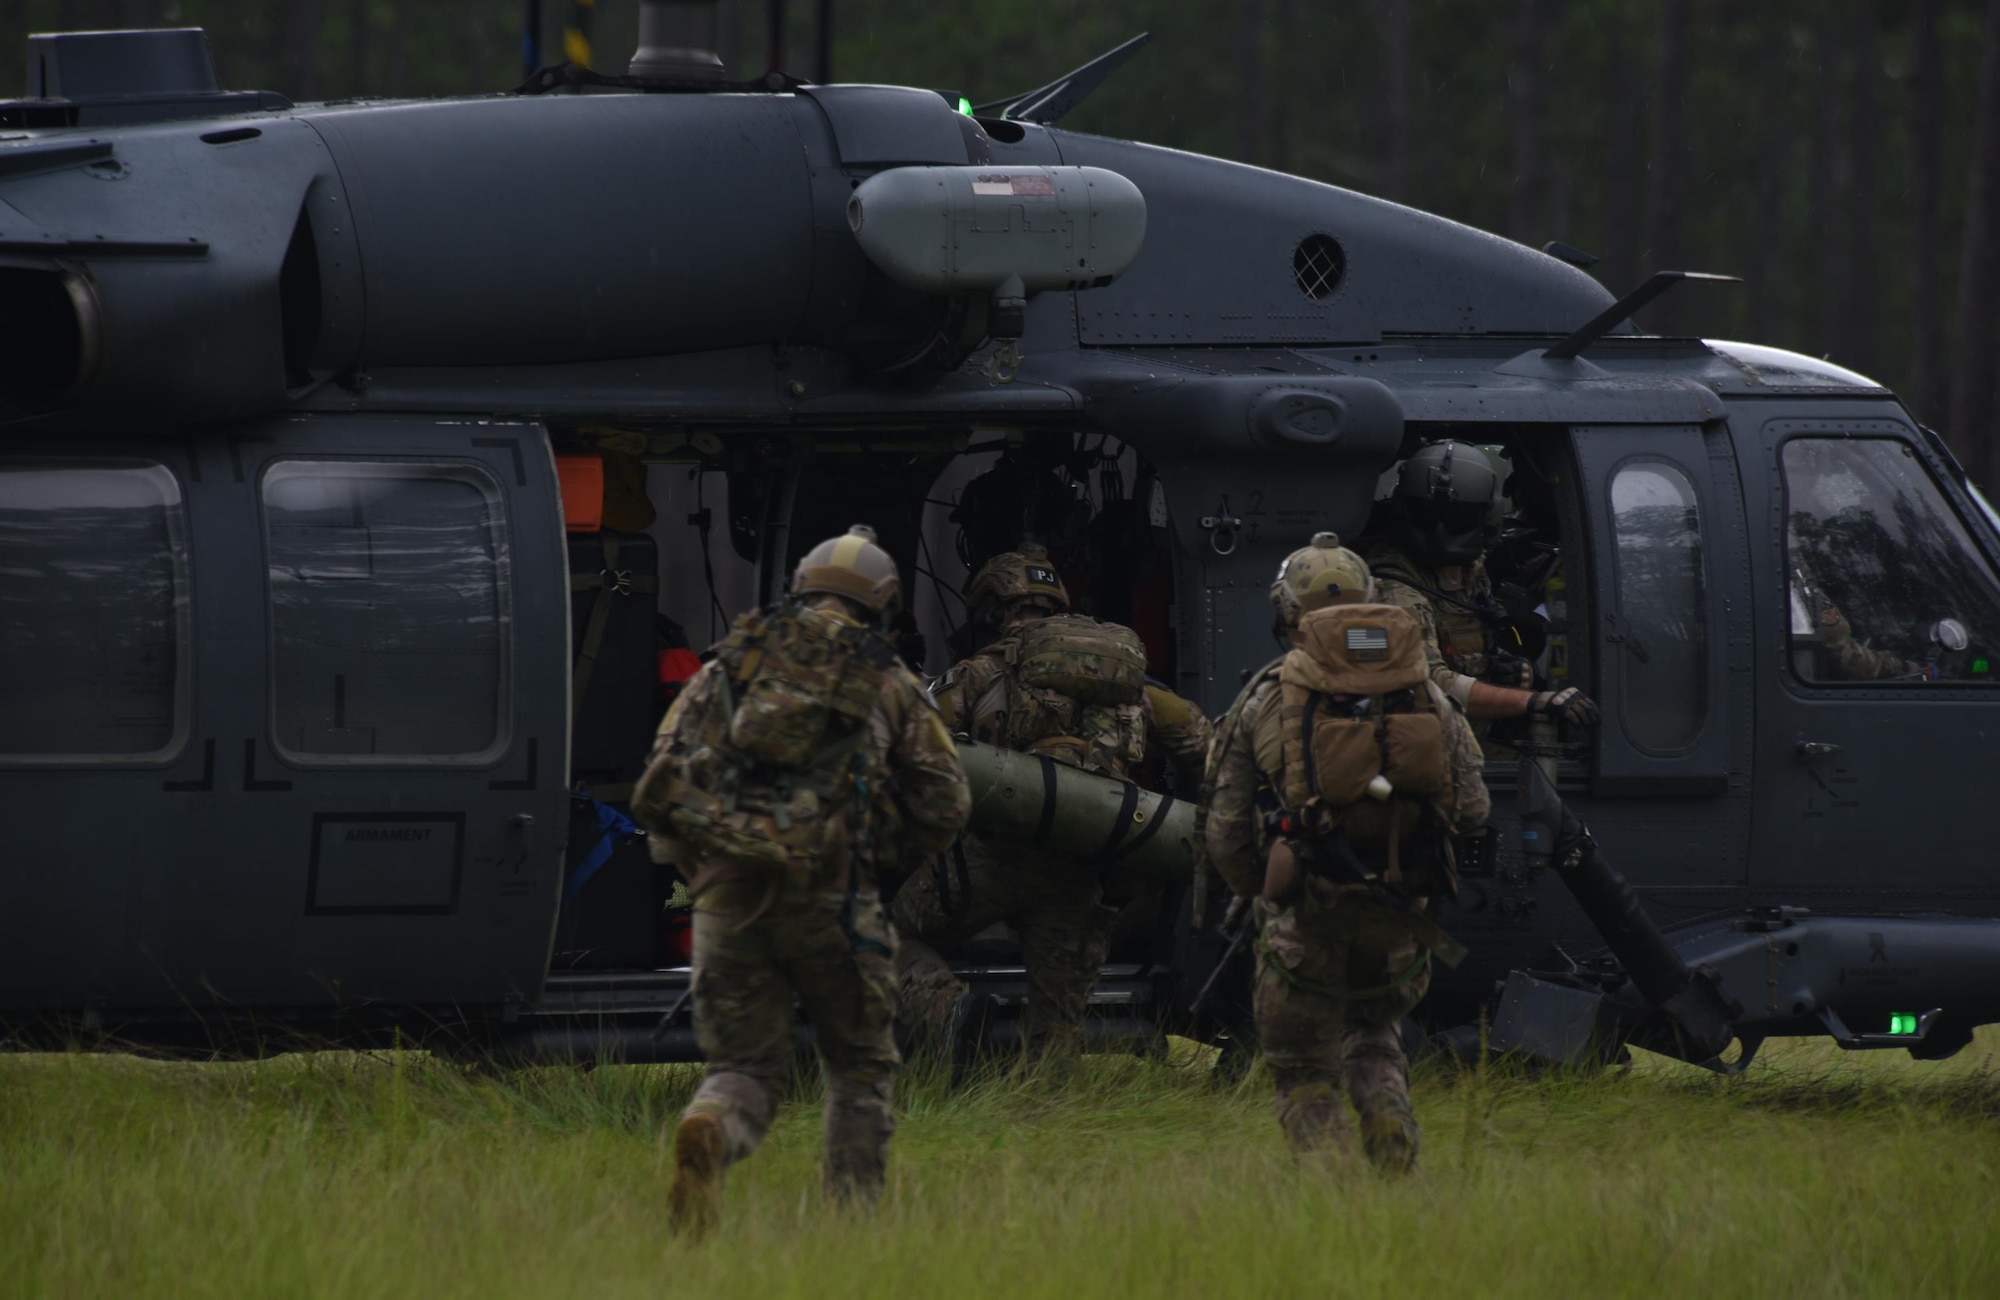 U.S. Air Force pararescuemen from Moody Air Force Base, Ga., embark into an HH-60G Pave Hawk after successfully simulating the rescue of a downed pilot from a wooded area near Tyndall Air Force Base, Fla., while taking part in exercise Stealth Guardian Aug. 8, 2017.